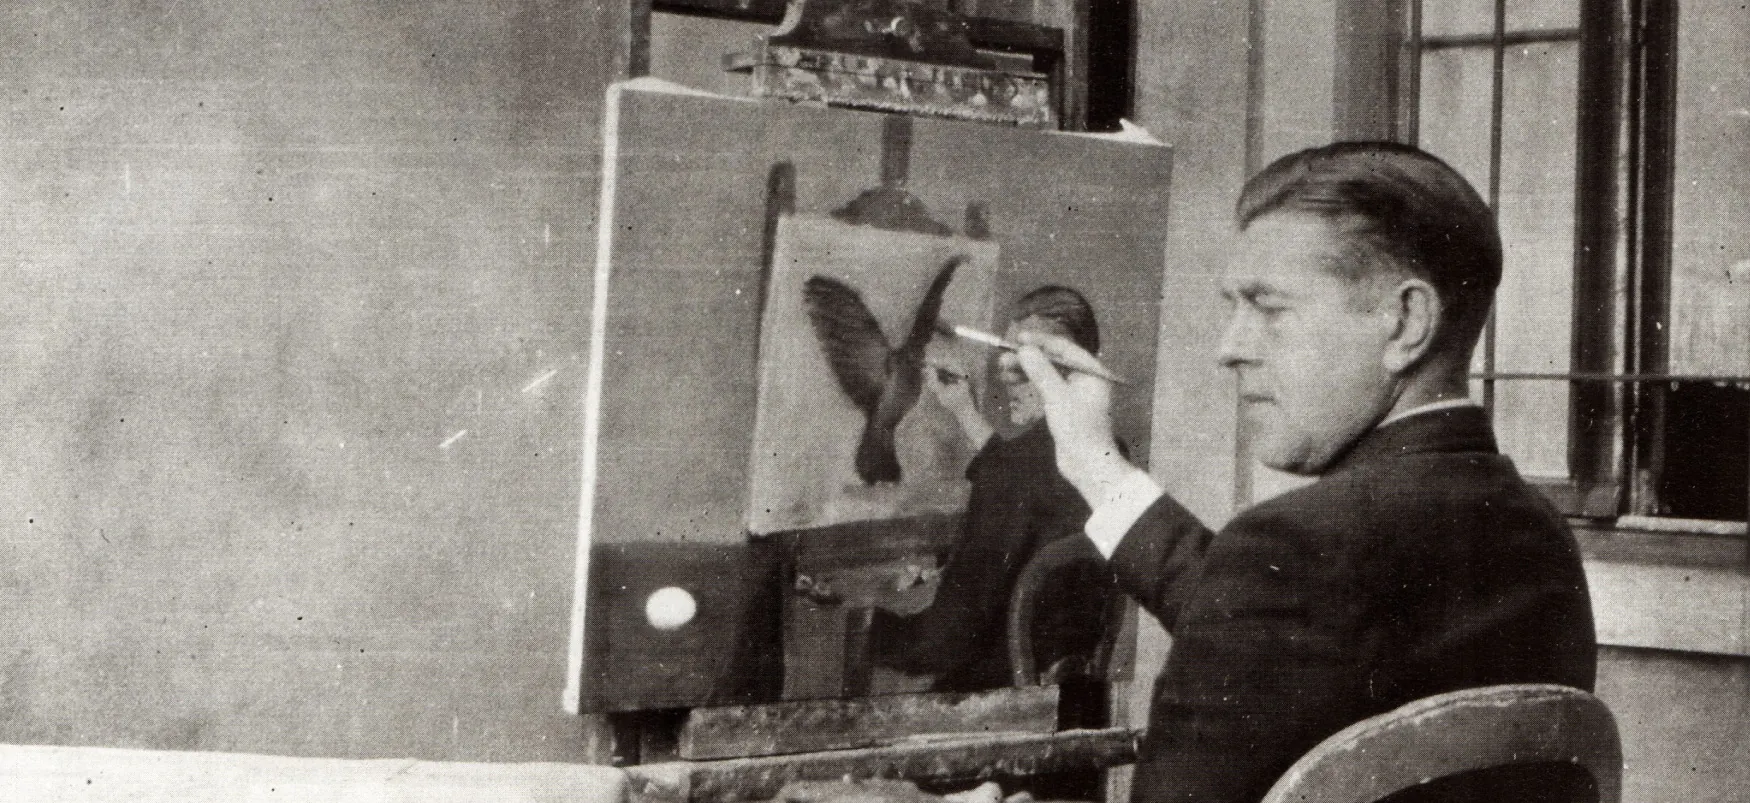 Black and white photograph of a seated man holding a paint brush to a nearly finished canvas resting on an easel.